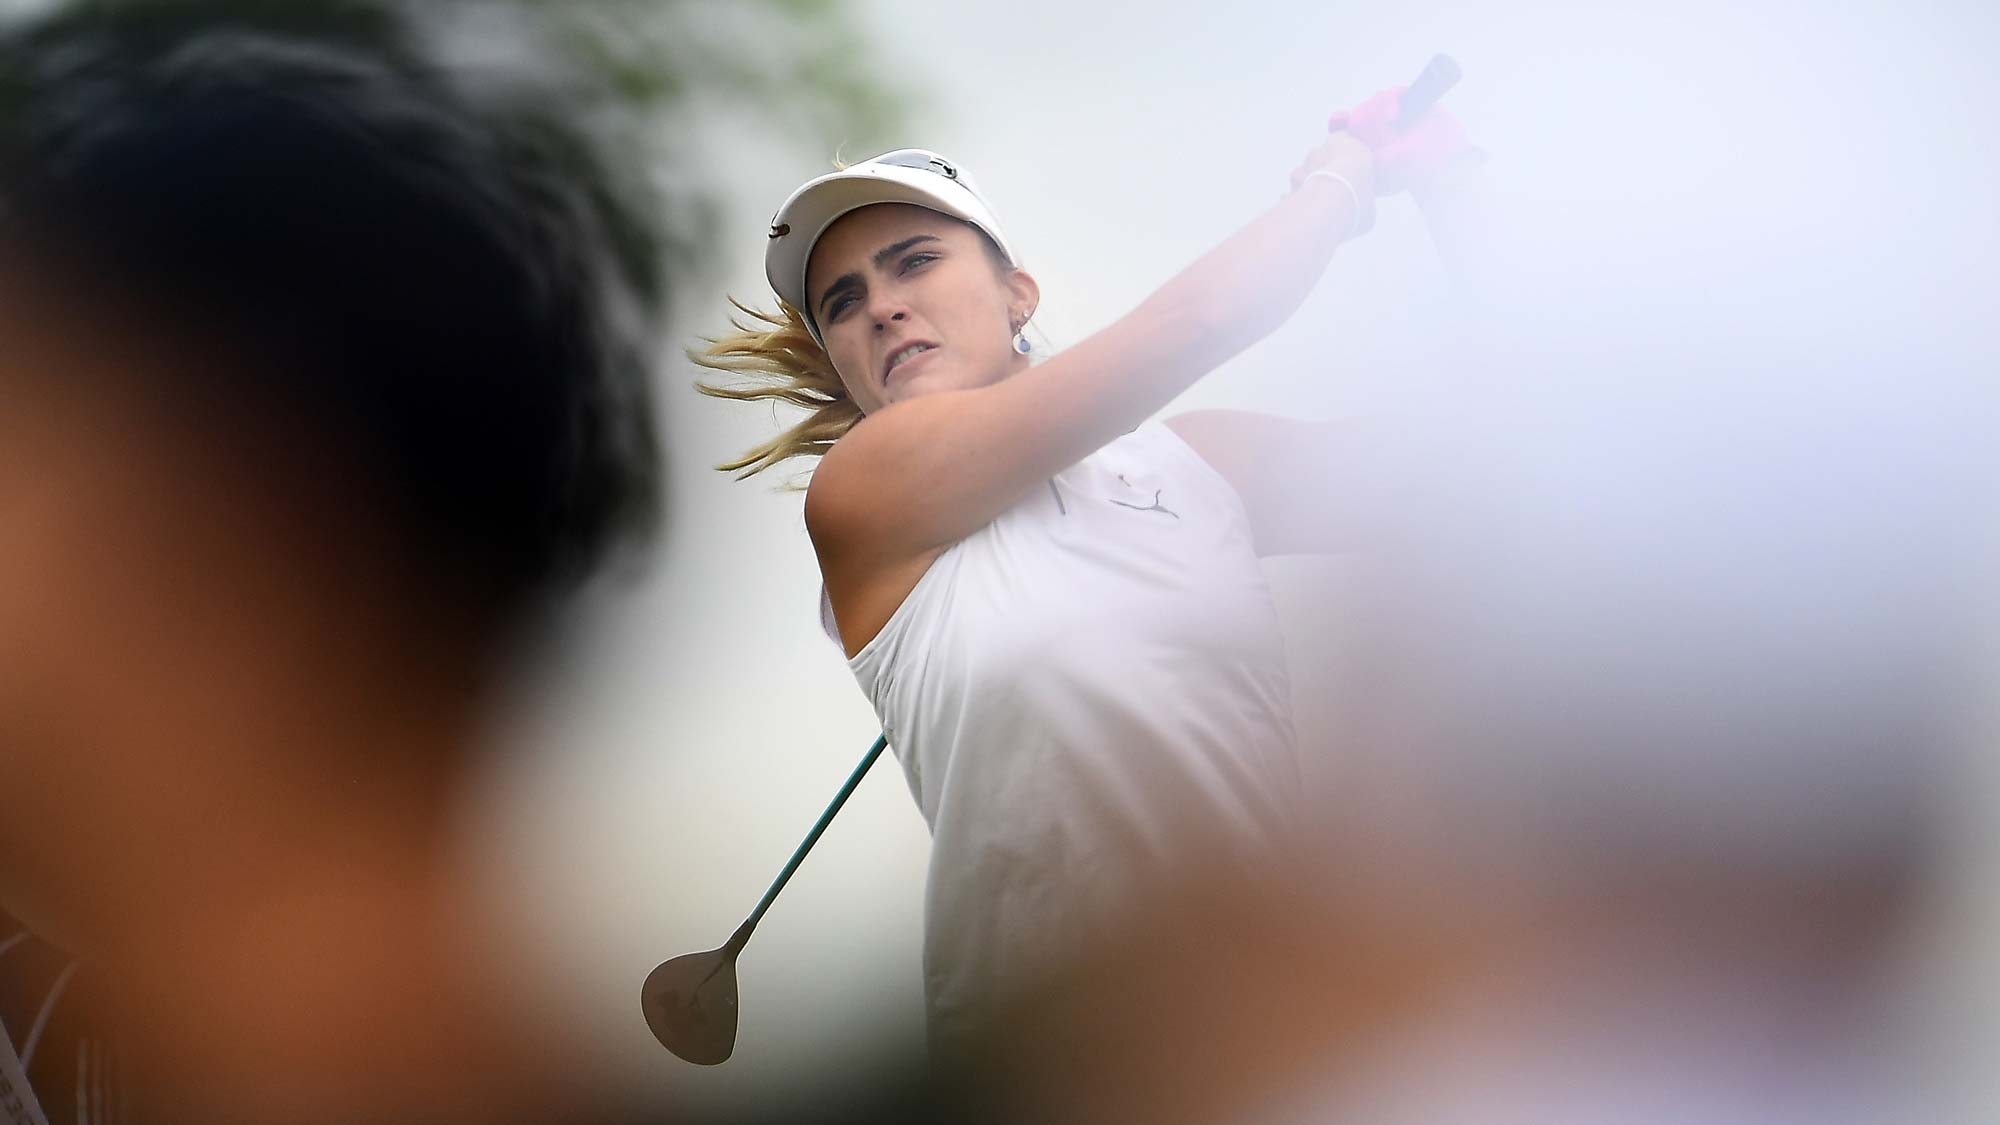 Lexi Thompson hits her tee shot on the second hole during the third round of the KPMG PGA Championship